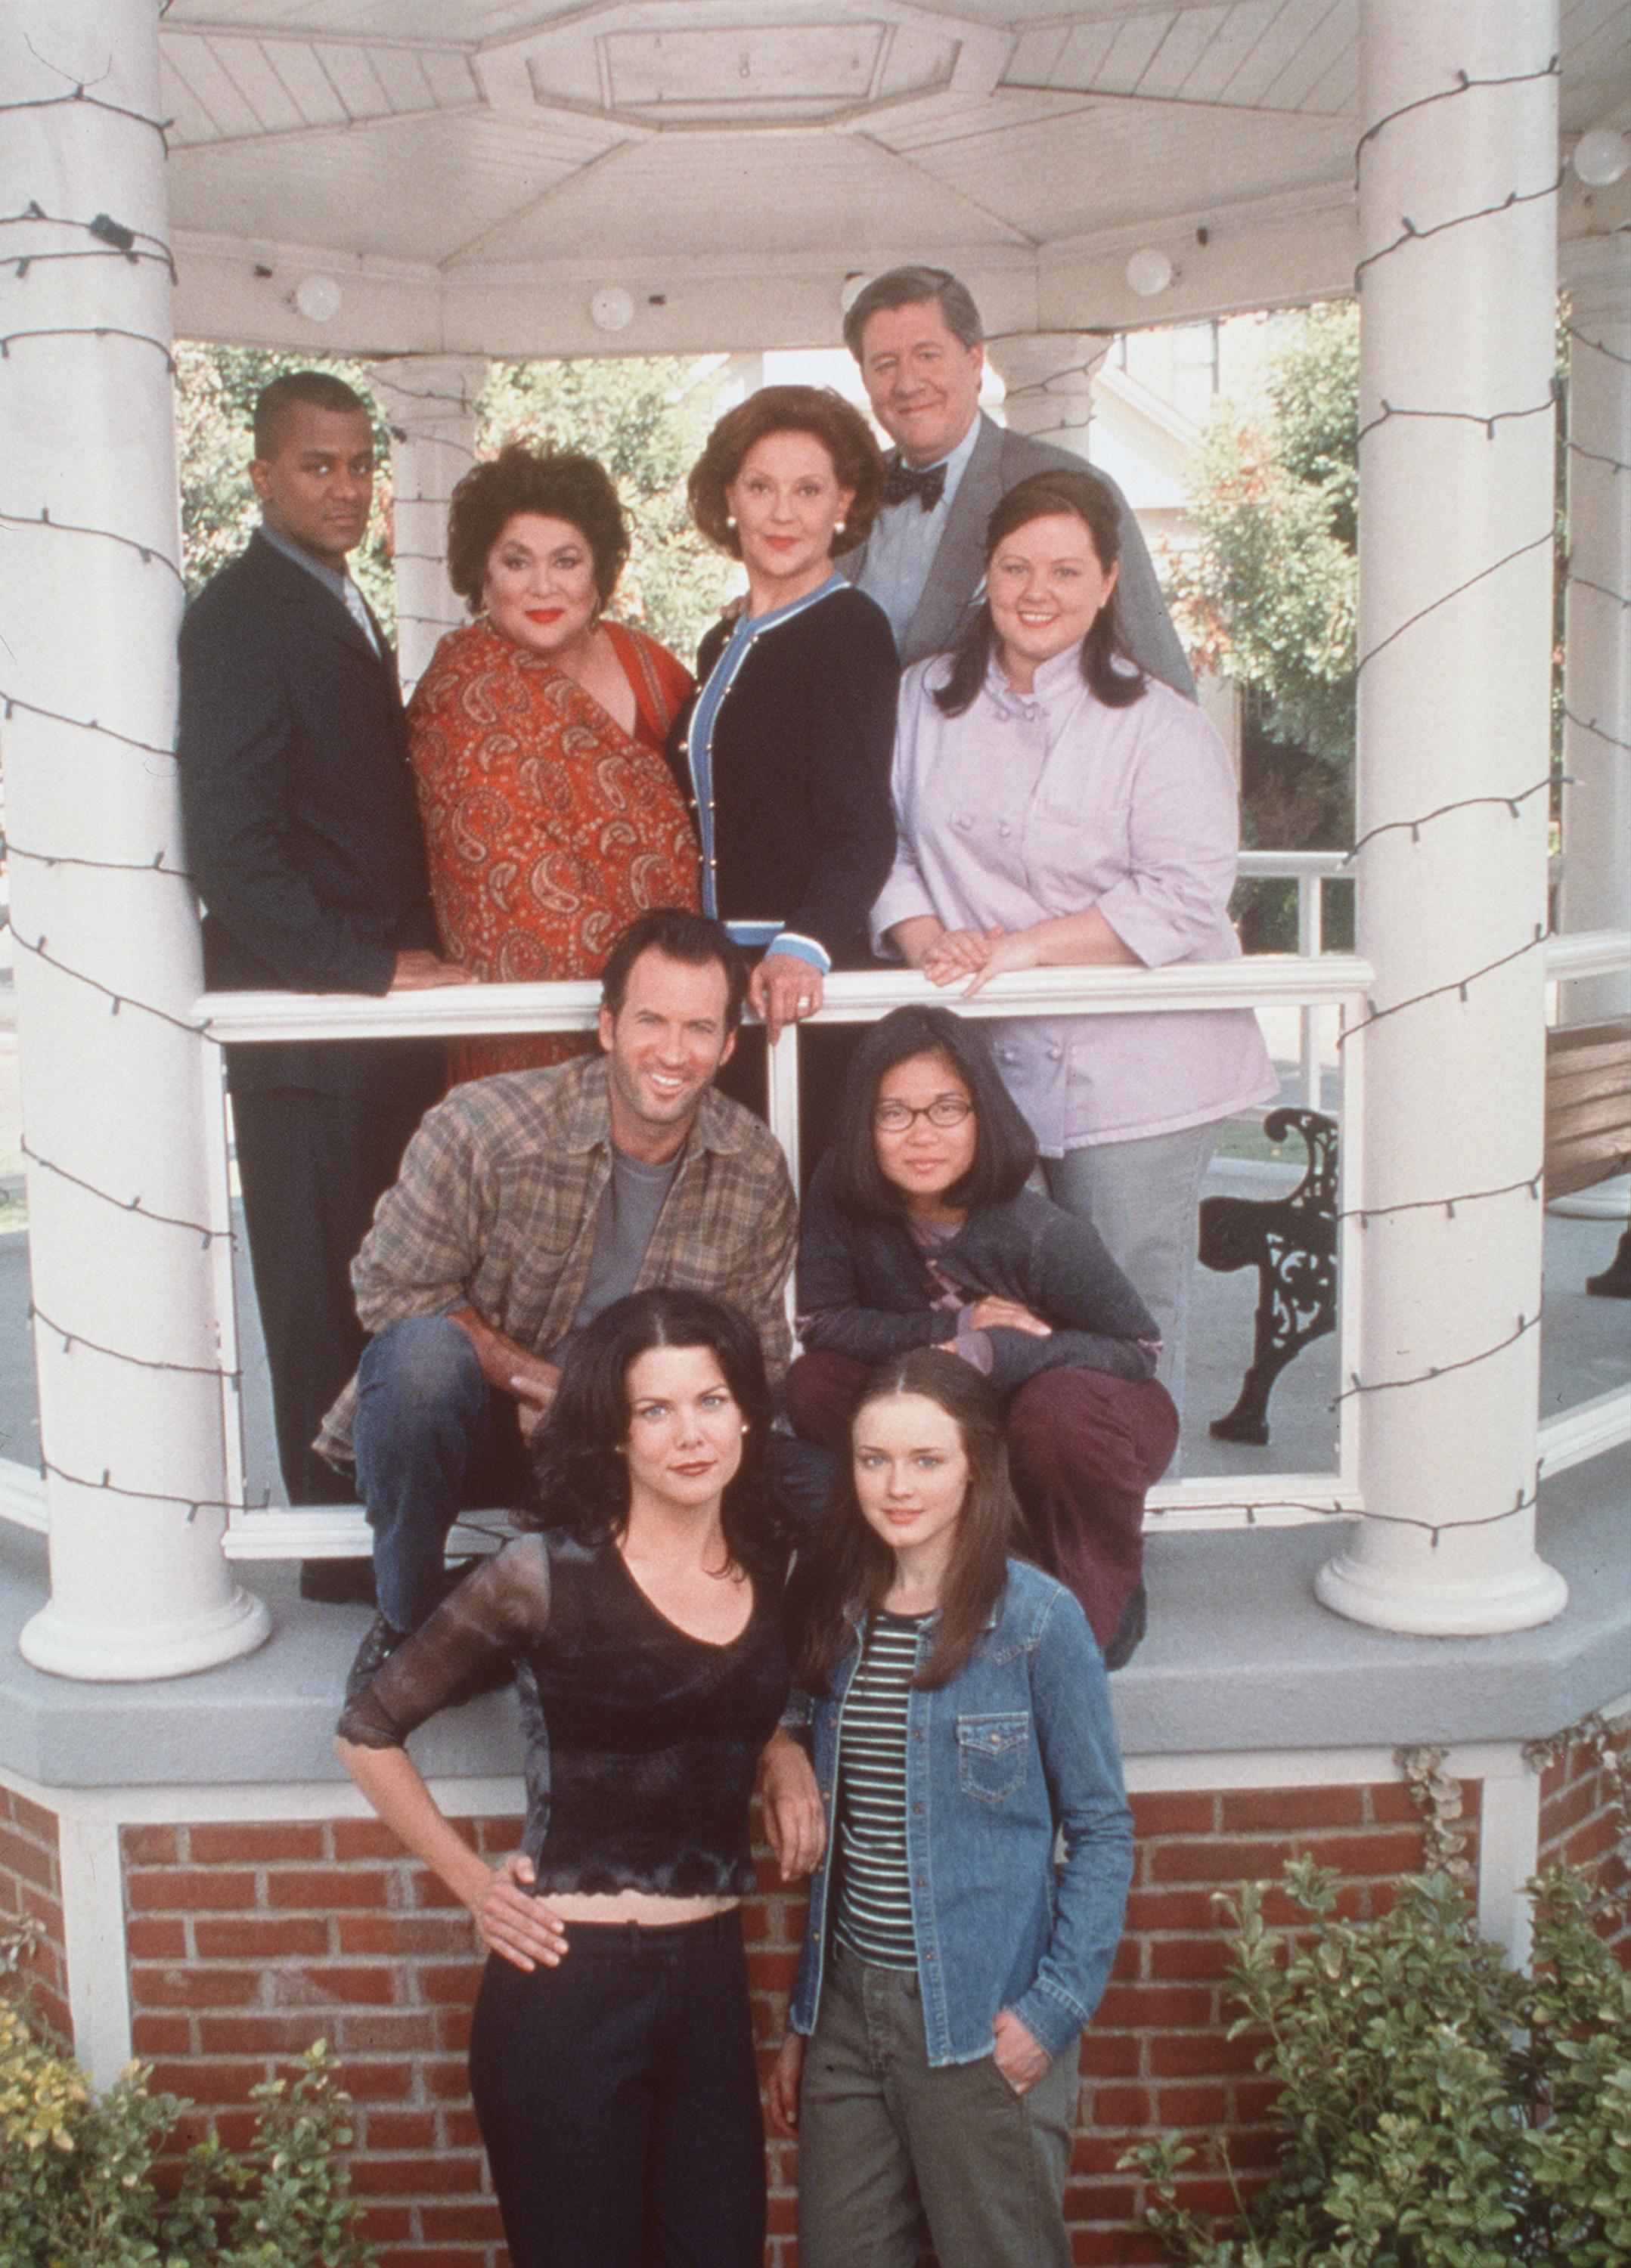 The cast of 'Gilmore Girls' poses for a promotional photo